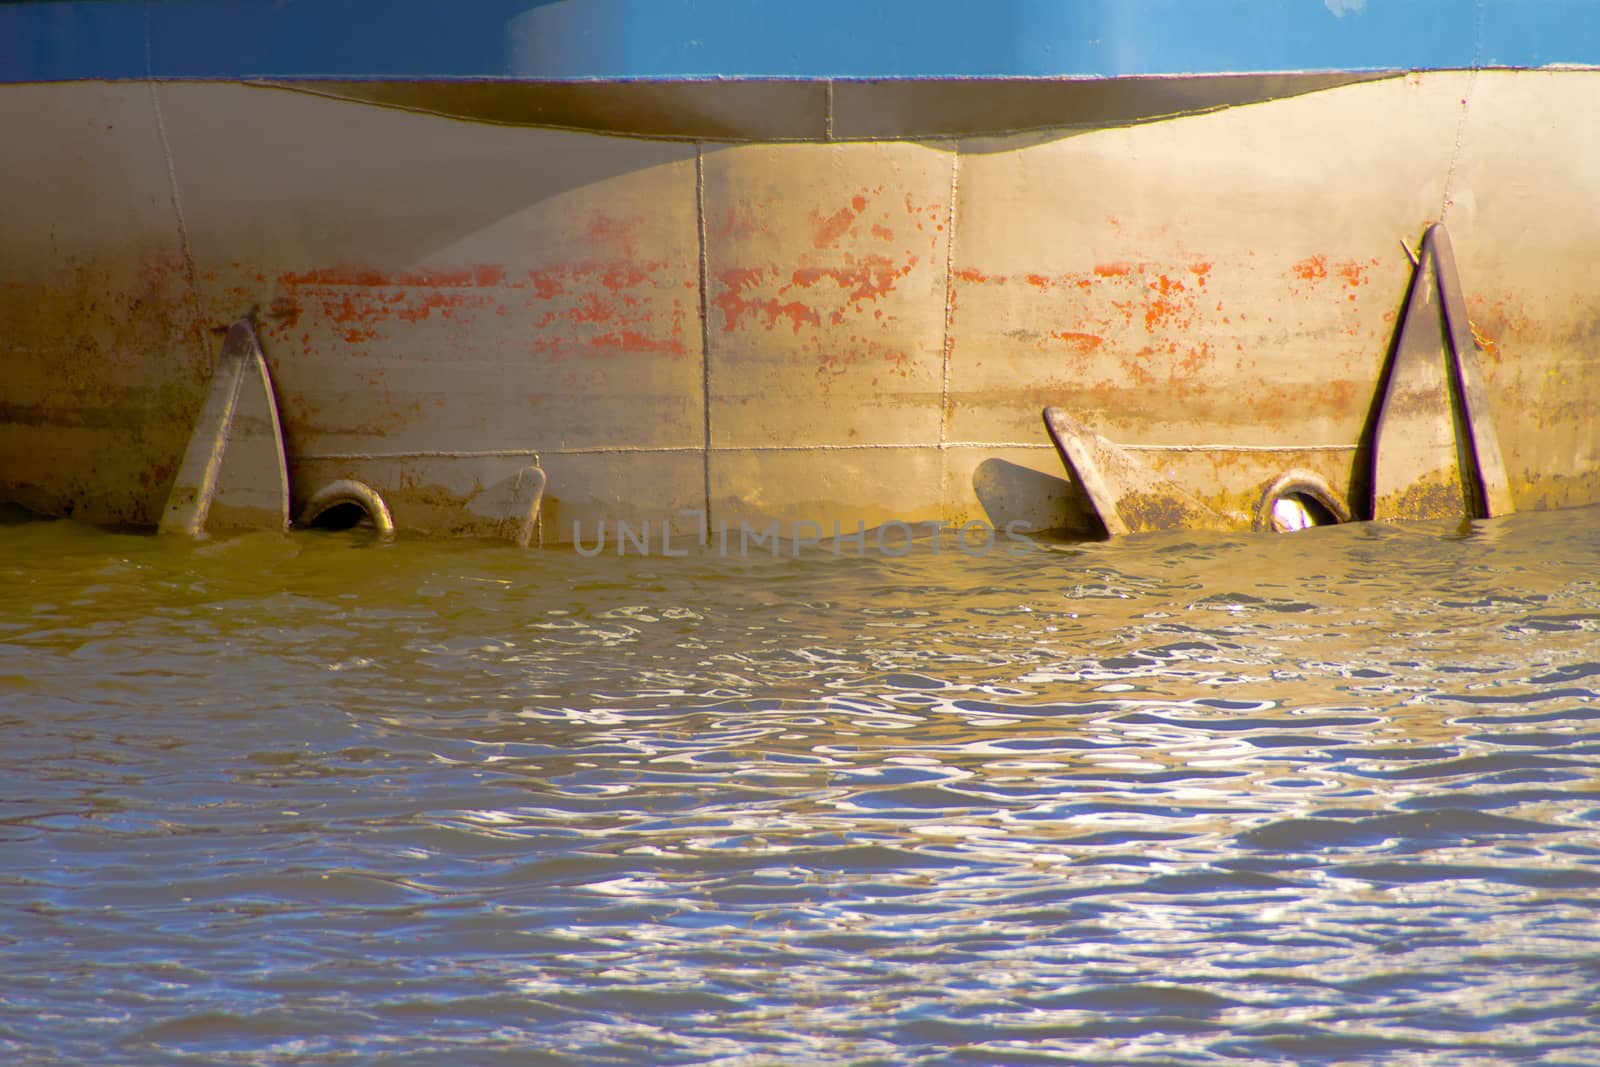 The prow of a tanker ship with anchor in water.